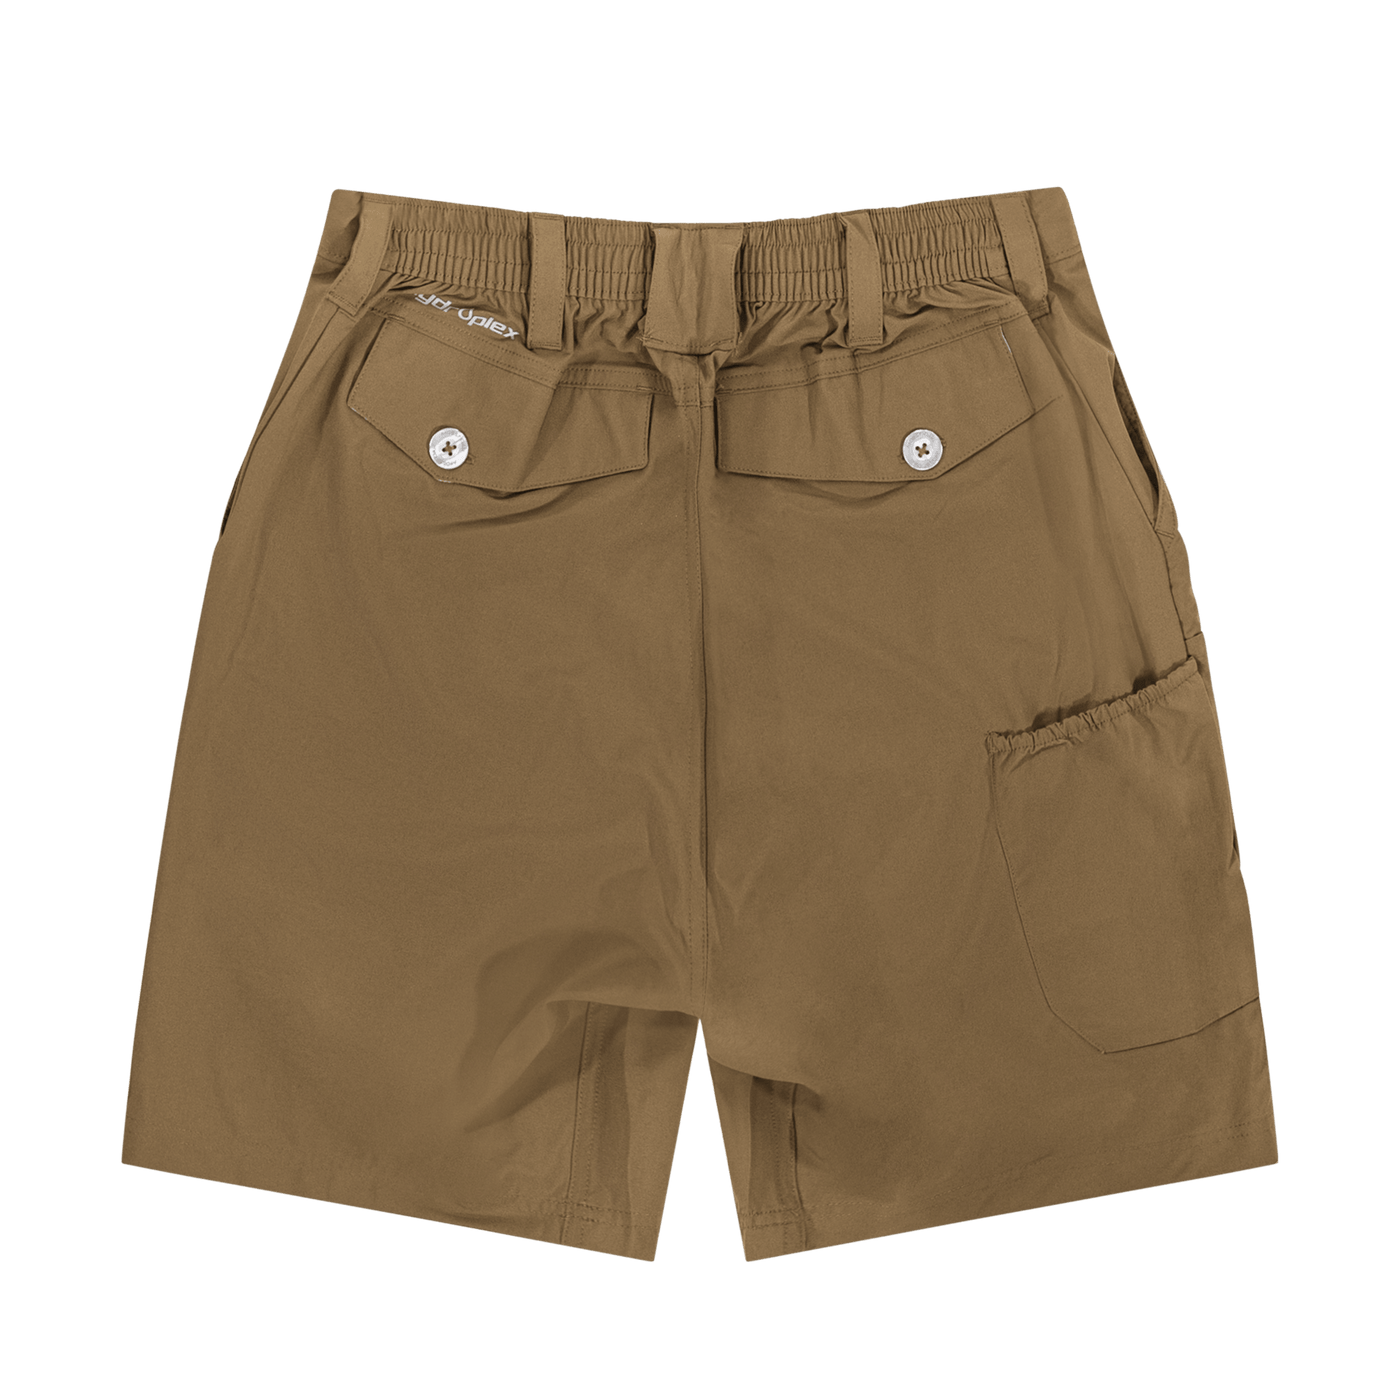 Mossy Oak Stretch Outdoor Hiking Shorts, Quick Dry Fishing Shorts for Men